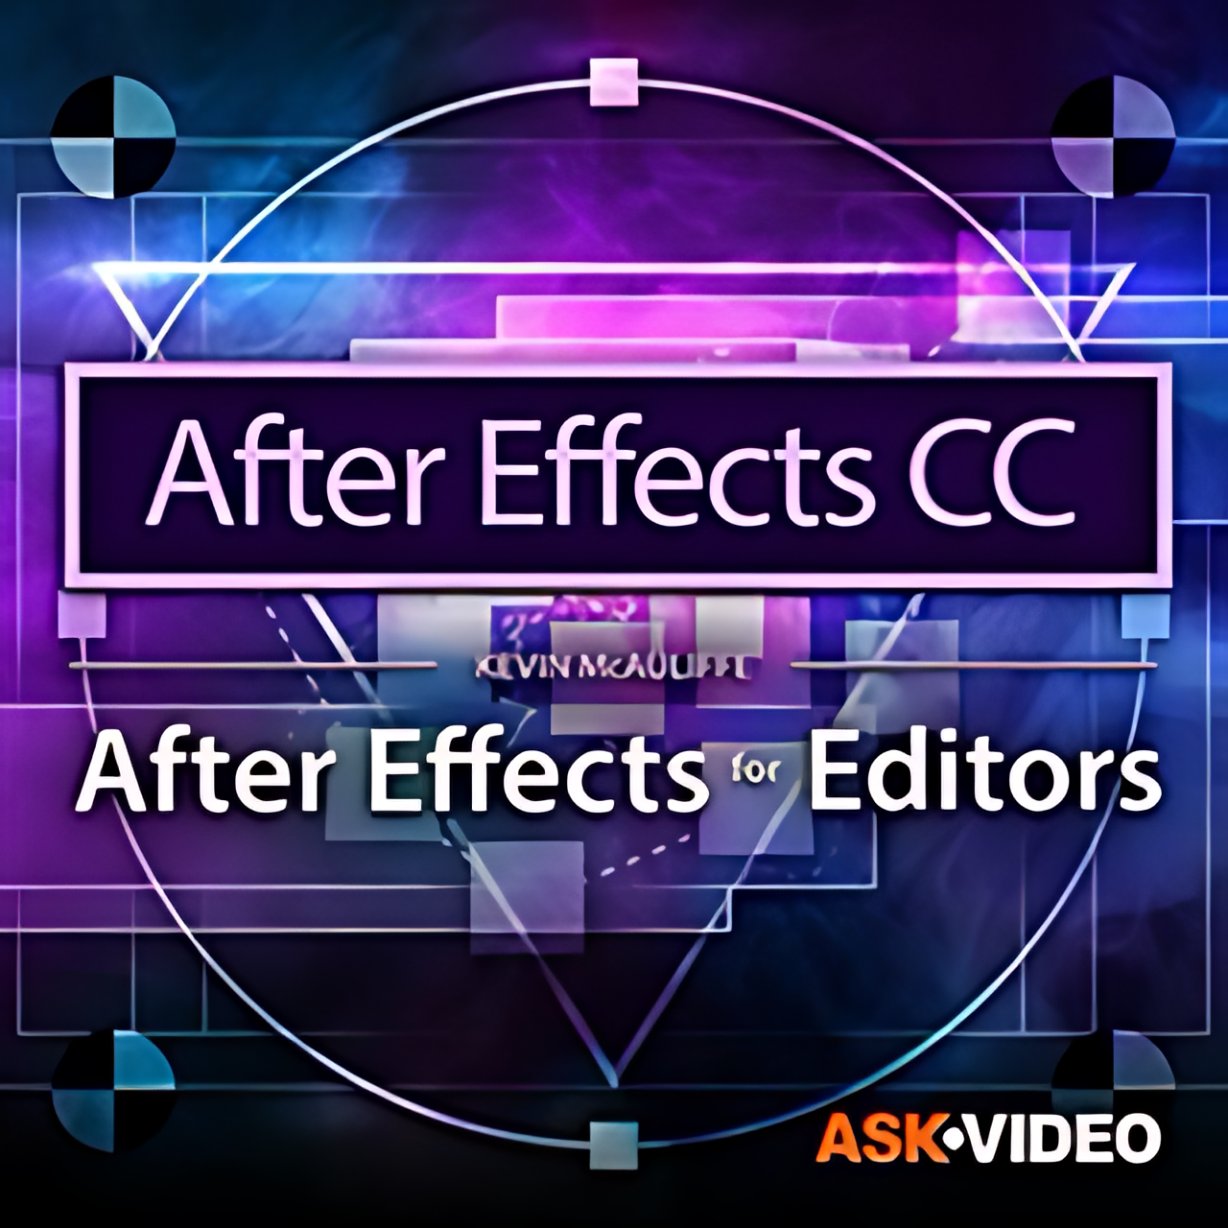 Editors Course For After Effects CC - Microsoft Apps